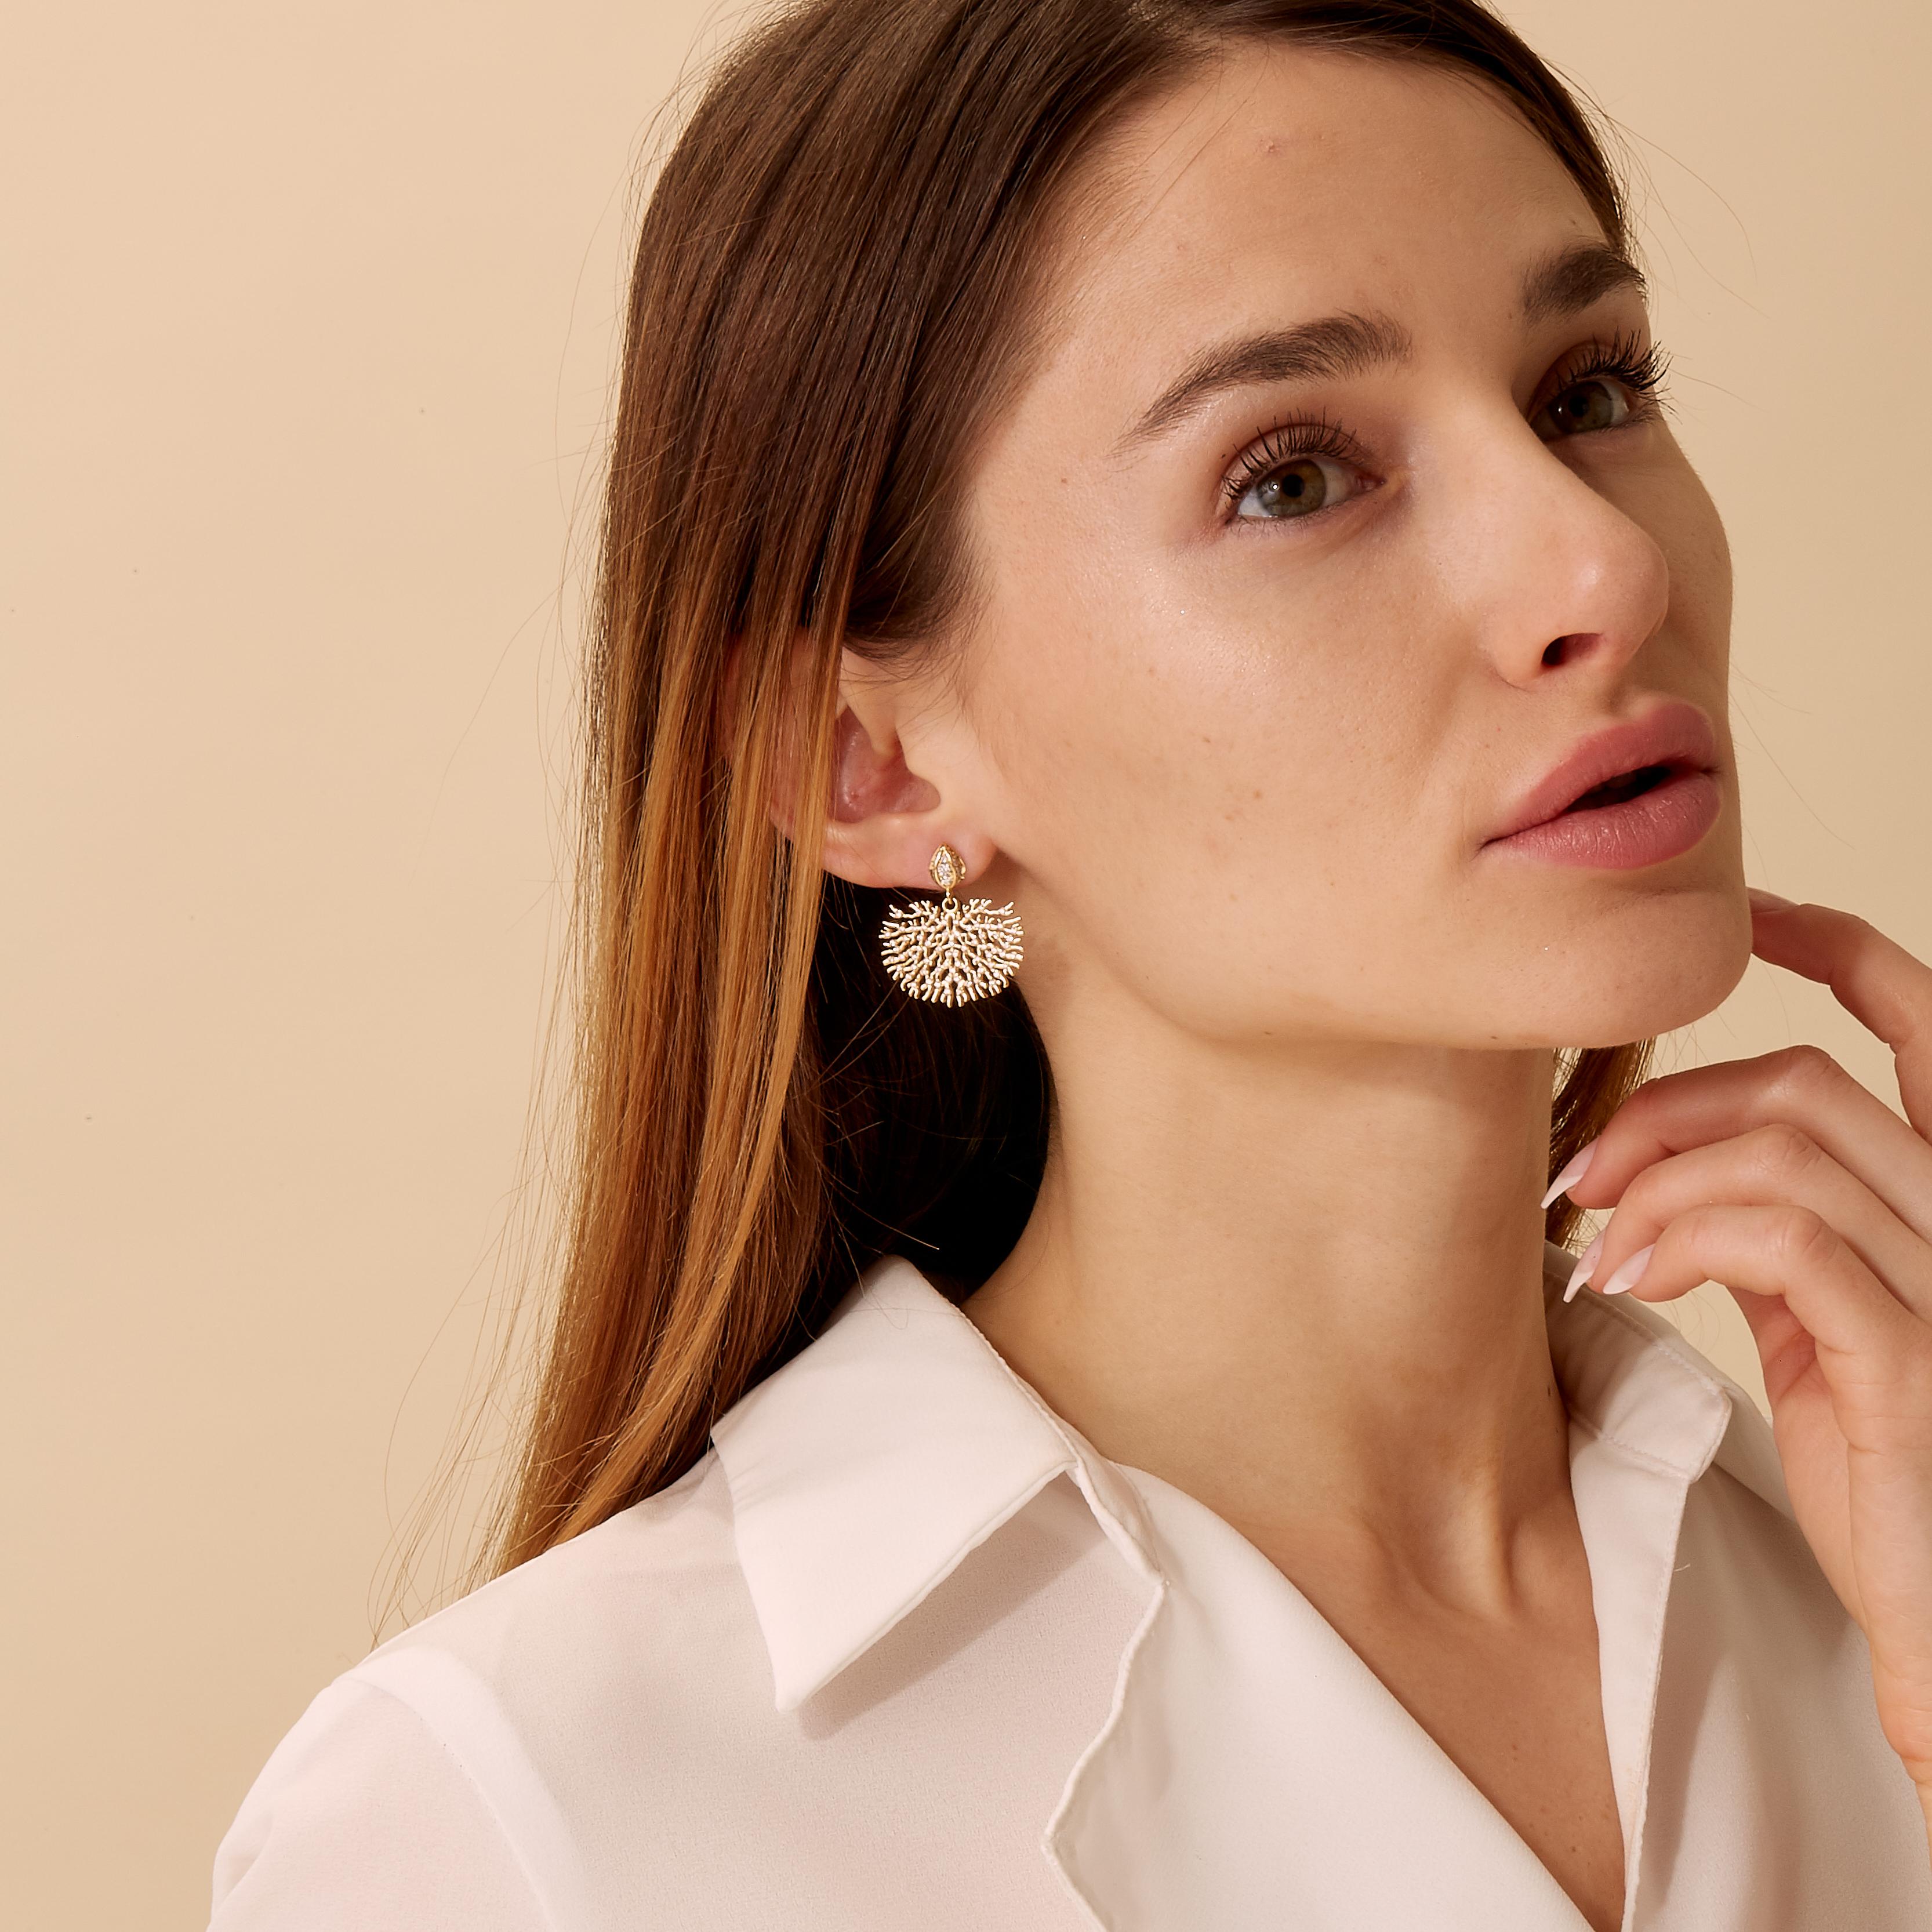 Created in 18 karat gold
Diamonds 1 carat approx.
Limited edition

Adorn yourself with these immaculate Candy Blue Topaz and Moon Quartz earrings crafted in 18 karat gold. Sparkling diamonds weighing around 1 carat enhance the bewitching pair, which